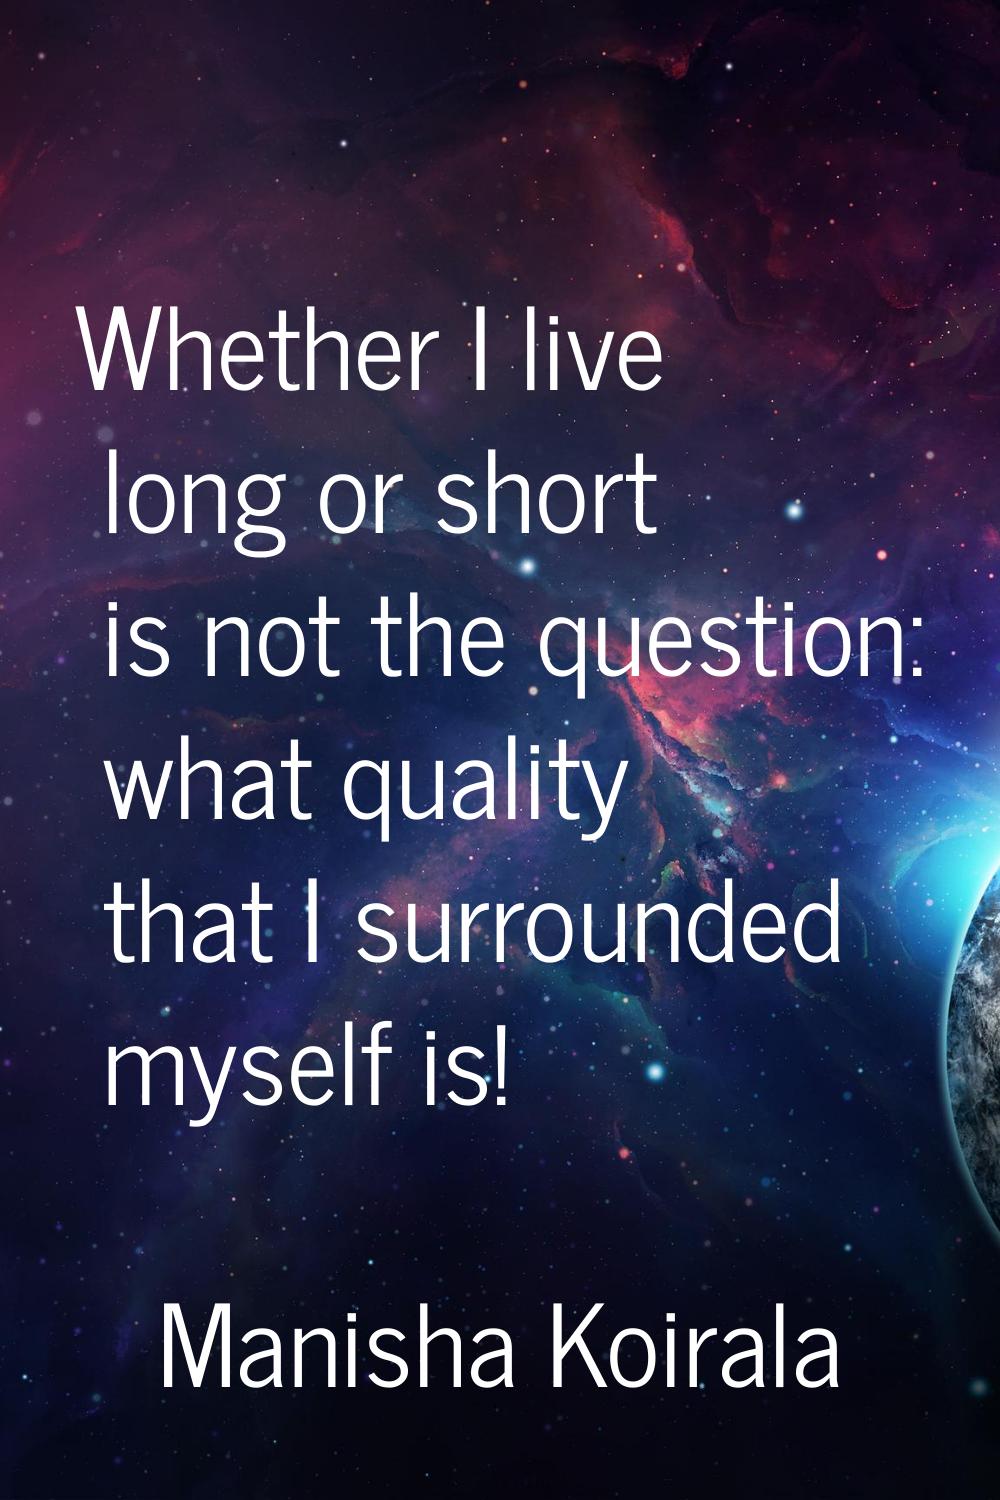 Whether I live long or short is not the question: what quality that I surrounded myself is!